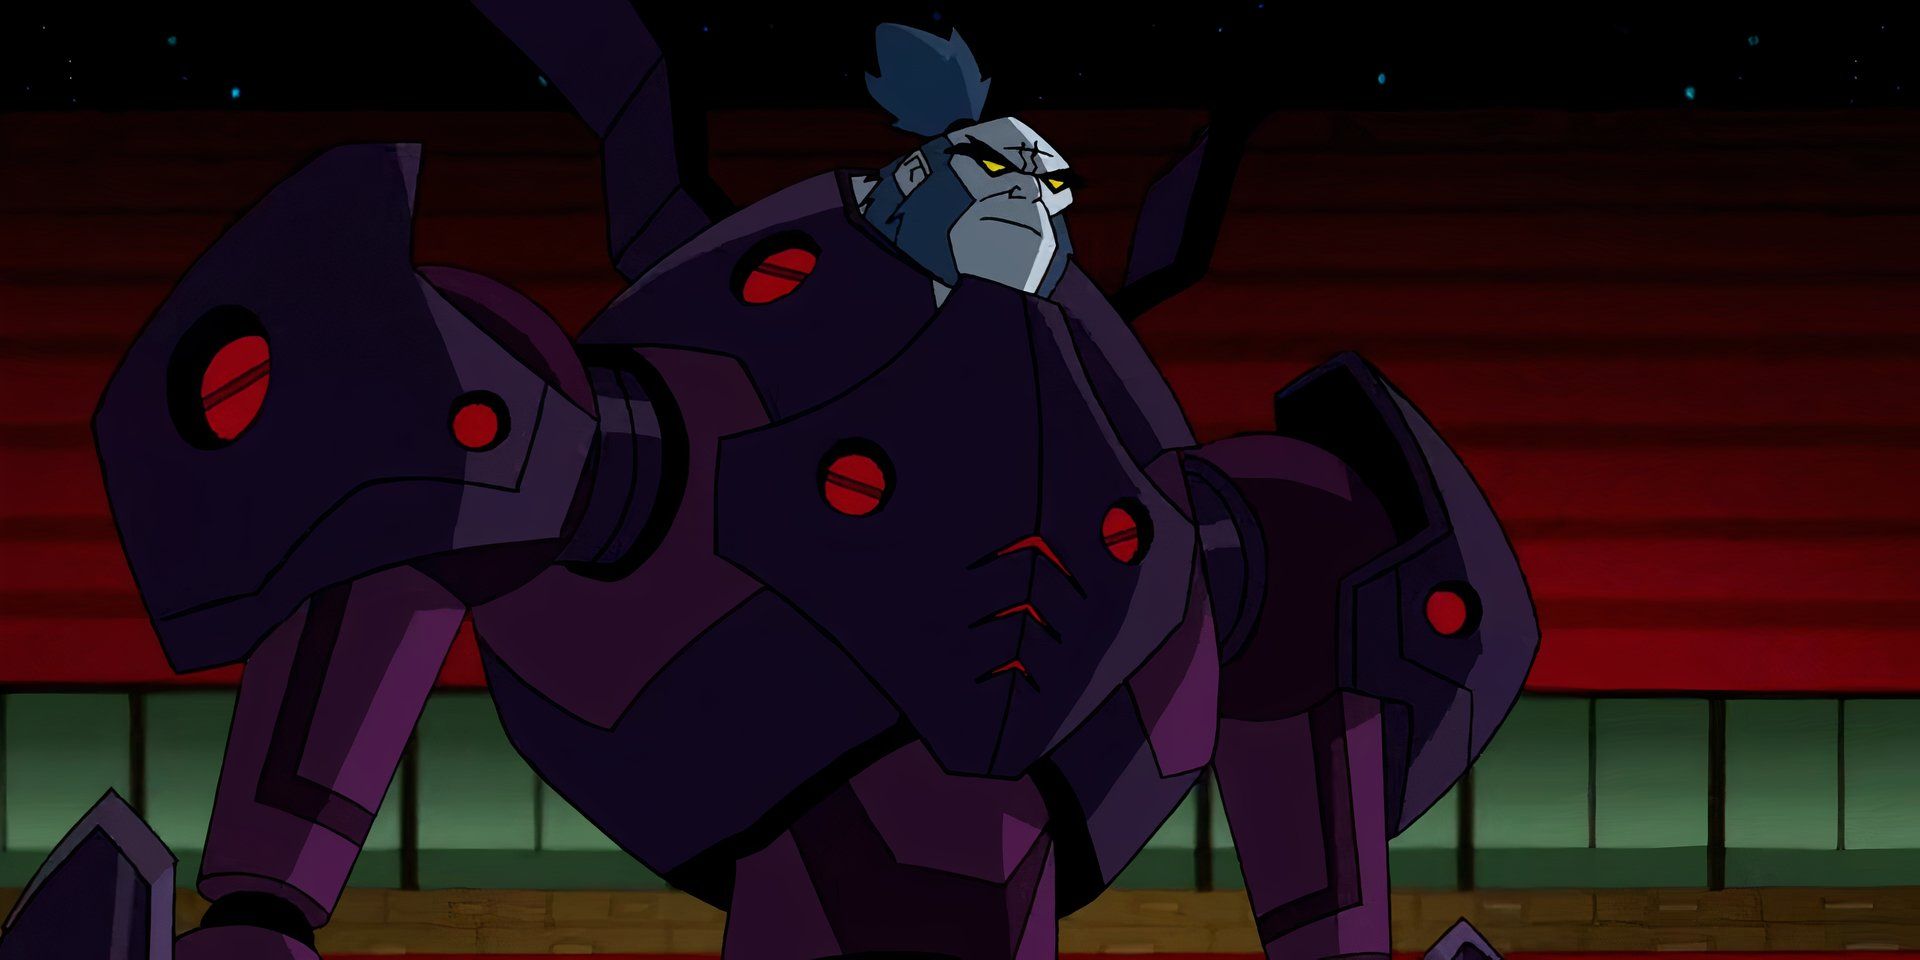 A large, daunting villain wearing high-tech purple armor covering his entire body by the name of Kenko in 'Ben 10'